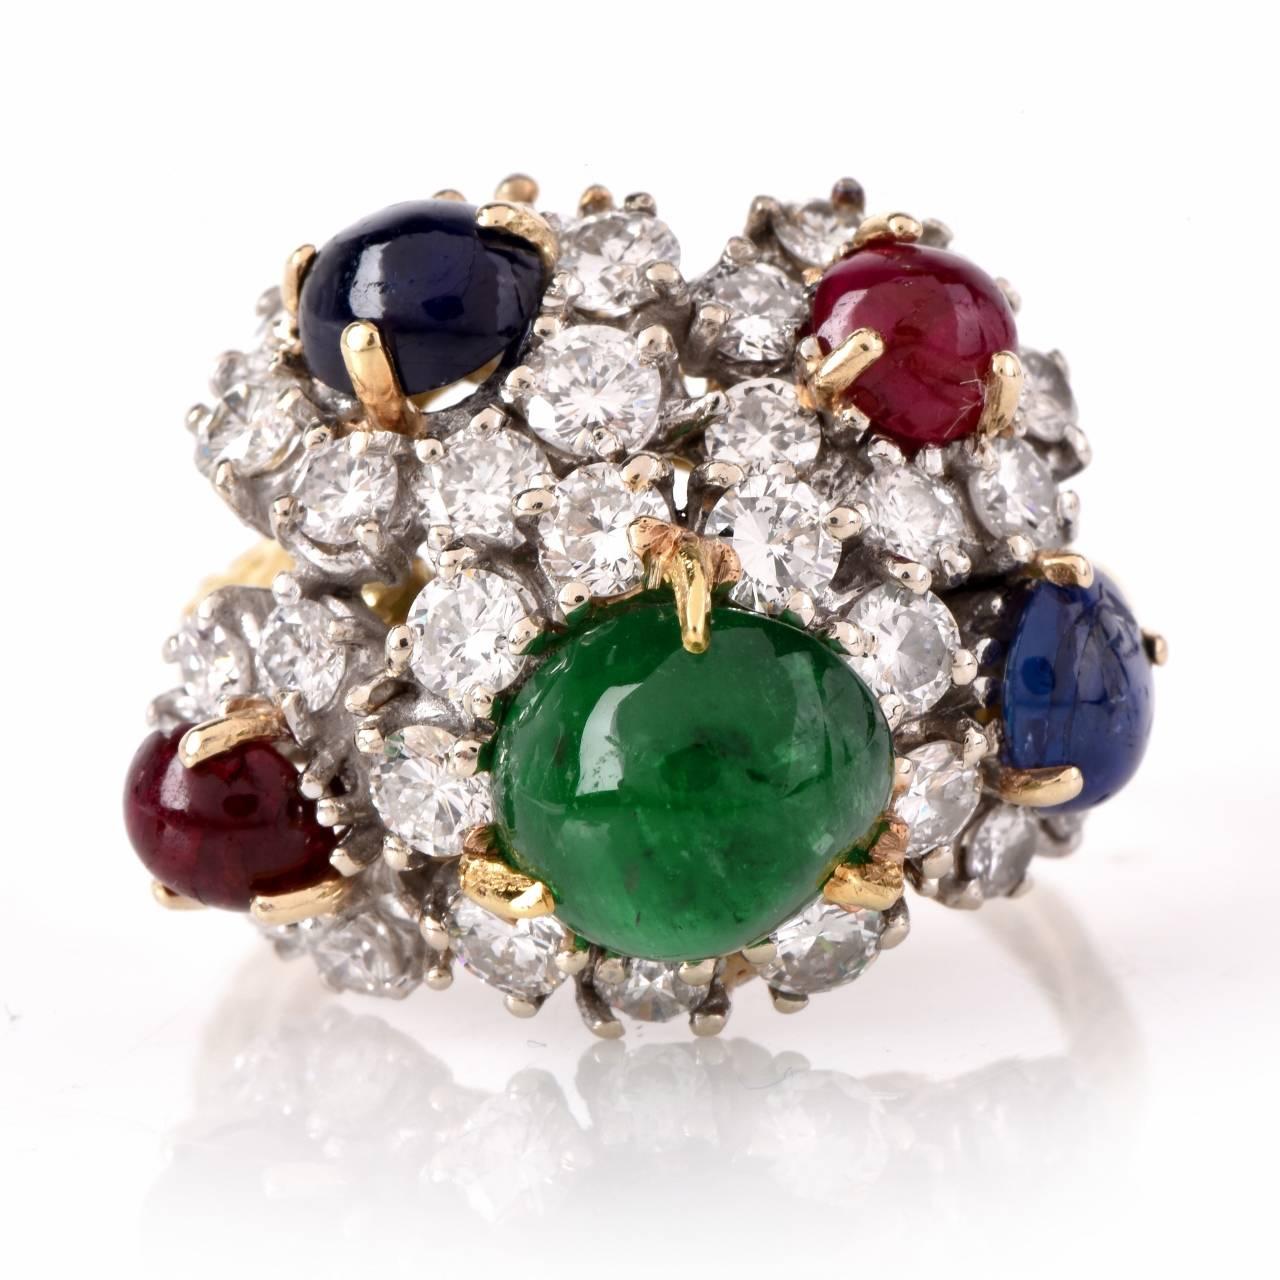 This  vintage cocktail ring with is crafted in 18K matte yellow gold, weighs 10.3 grams and measures 15mm wide and 10mm high. Designed as an assemblage of 5 graduated flowers, centered with emerald, sapphire and rub cabochons surrunded by  33